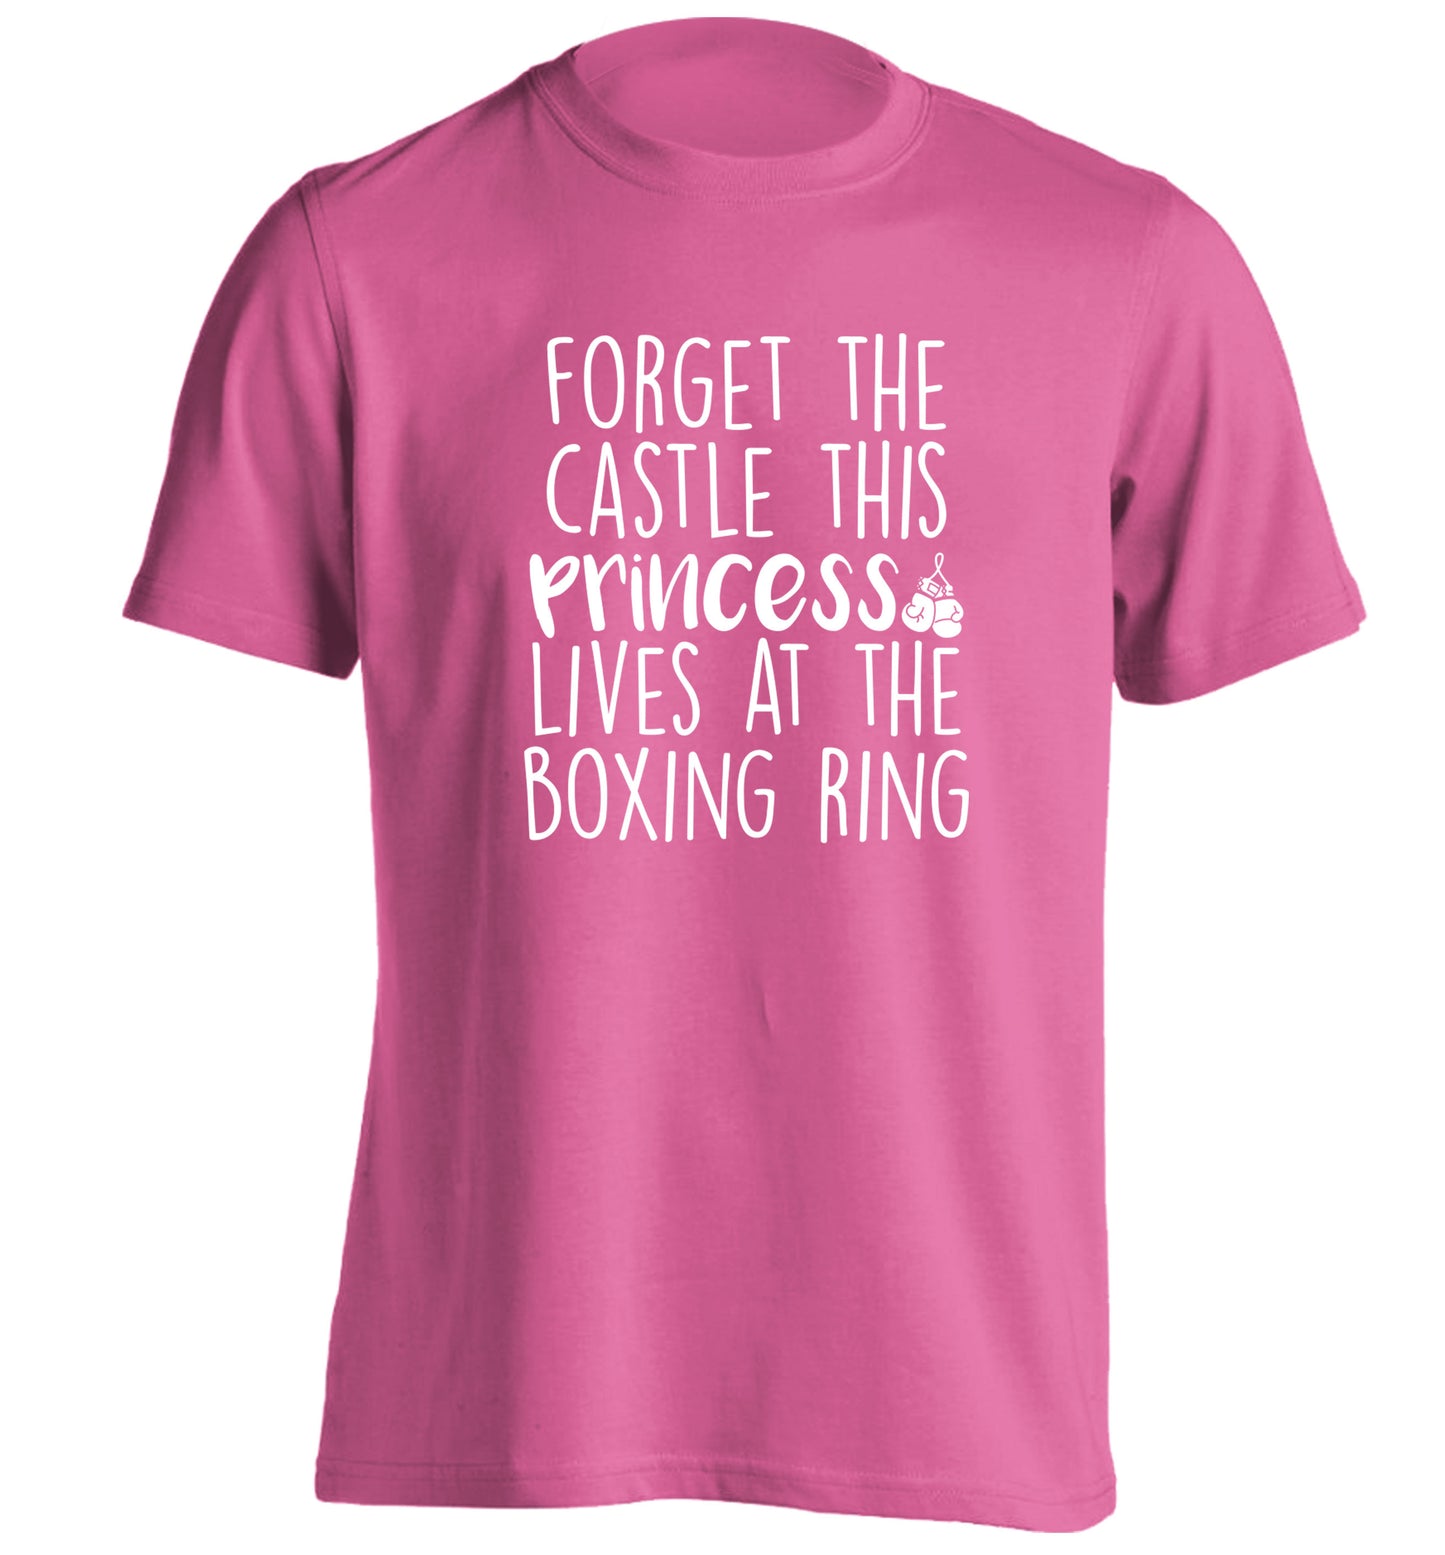 Forget the castle this princess lives at the boxing ring adults unisex pink Tshirt 2XL